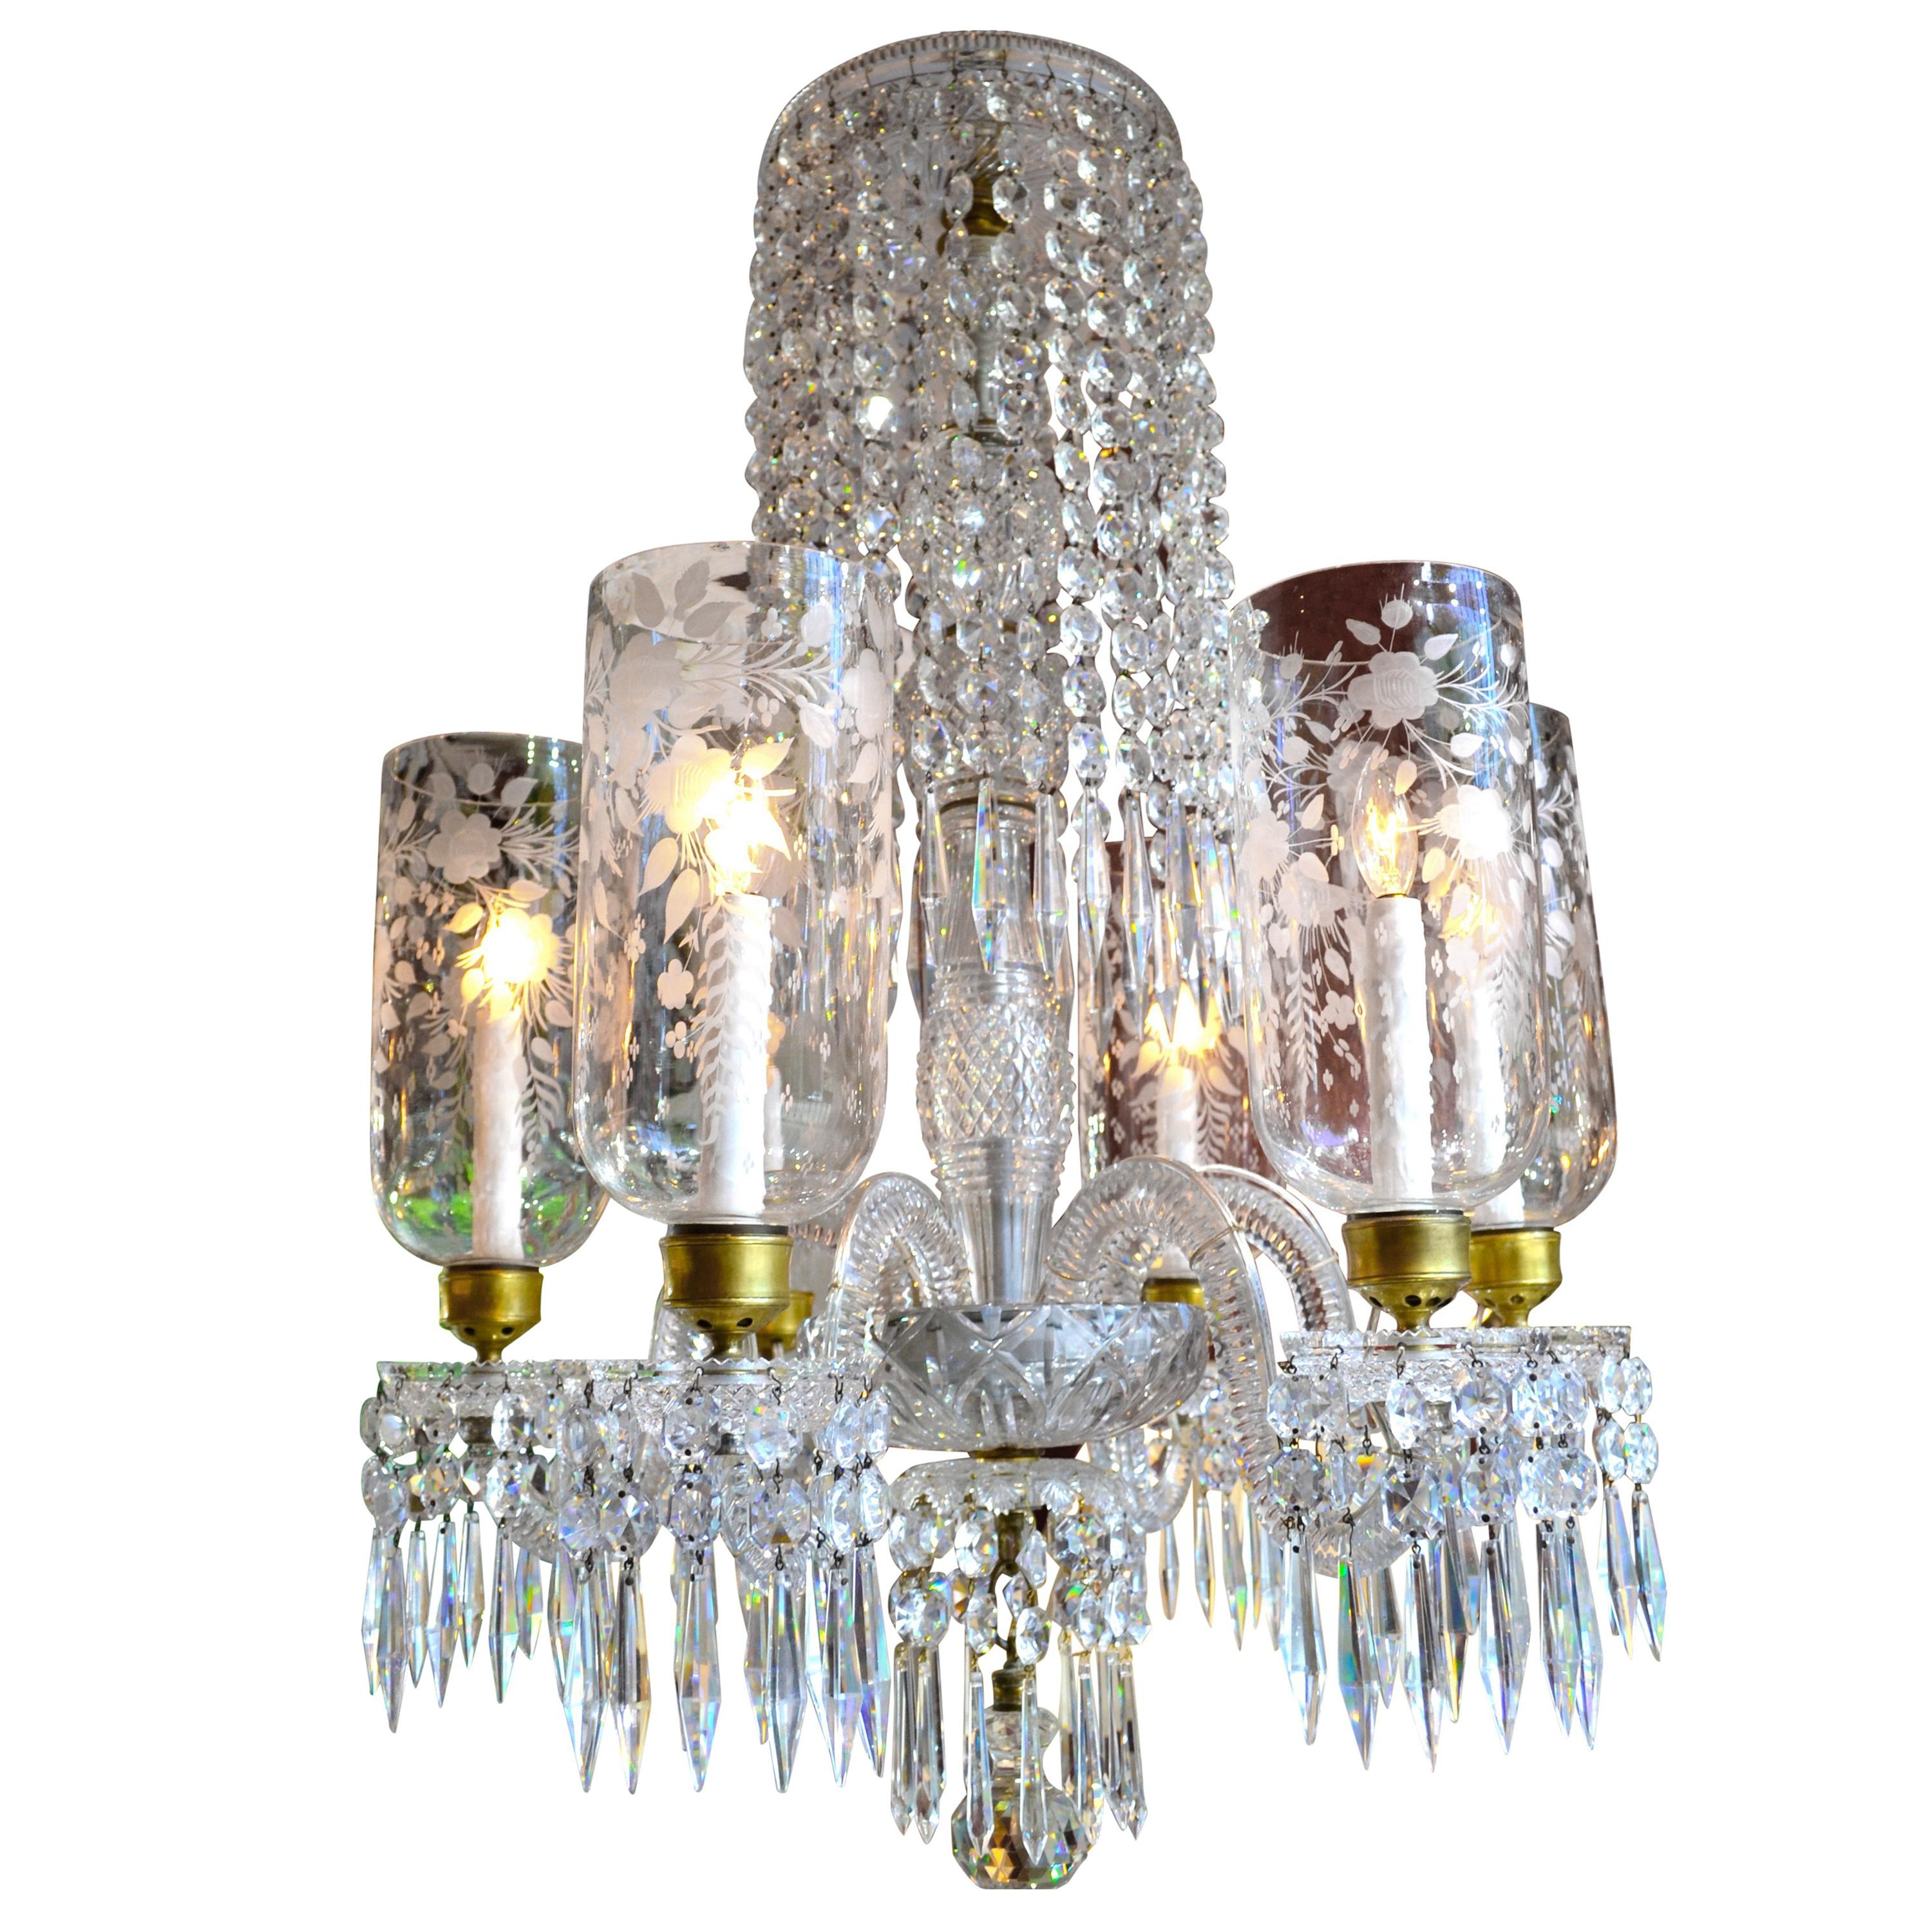 English Cut Crystal Chandelier with Engraved Hurricane Shades